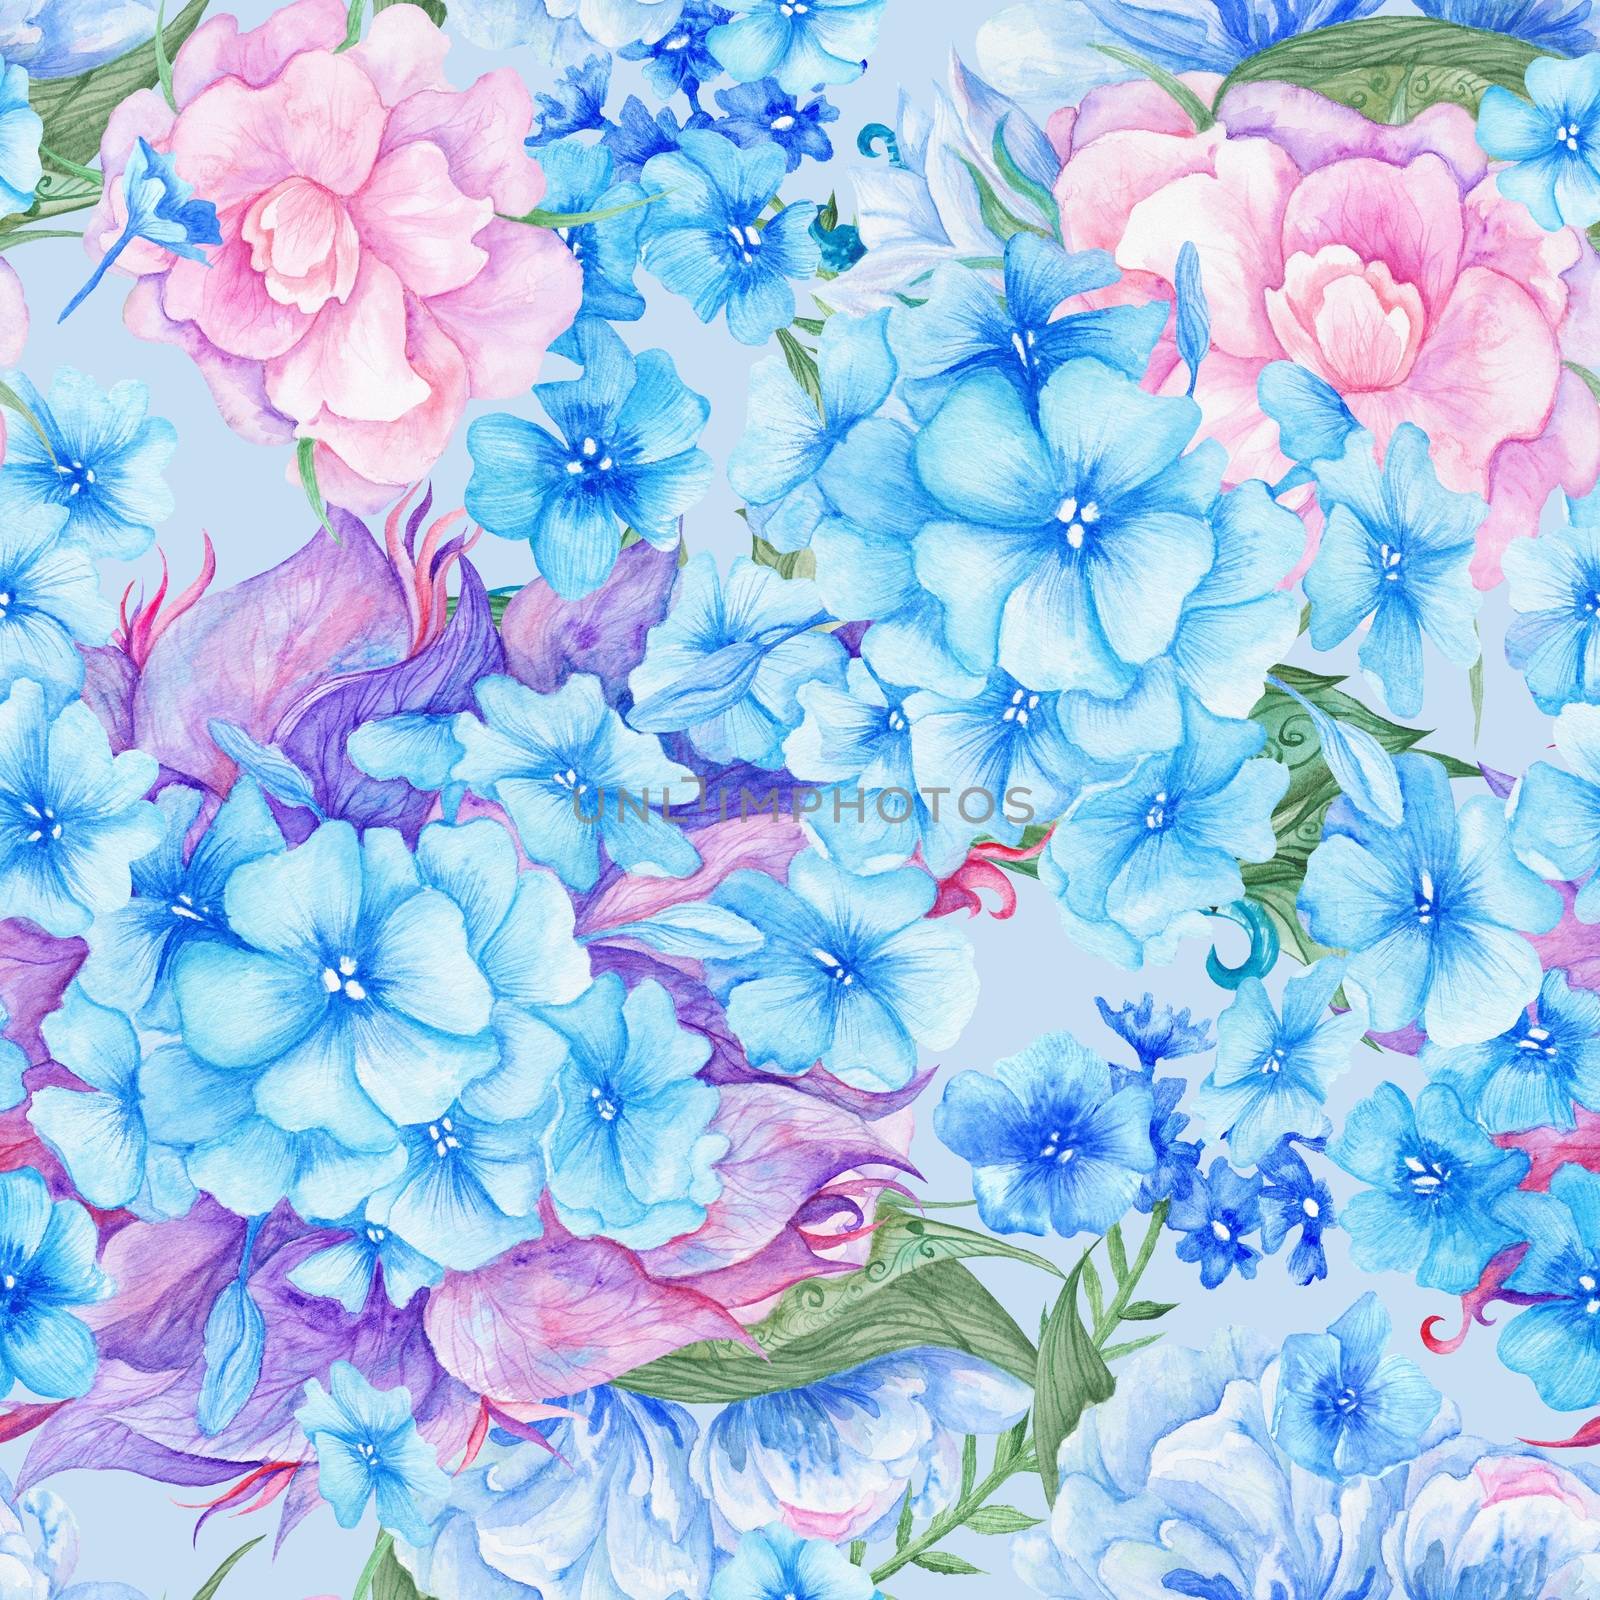 Seamless watercolor flower texture for wedding, wallpaper, textile design with blue and pink hydrangea and peony